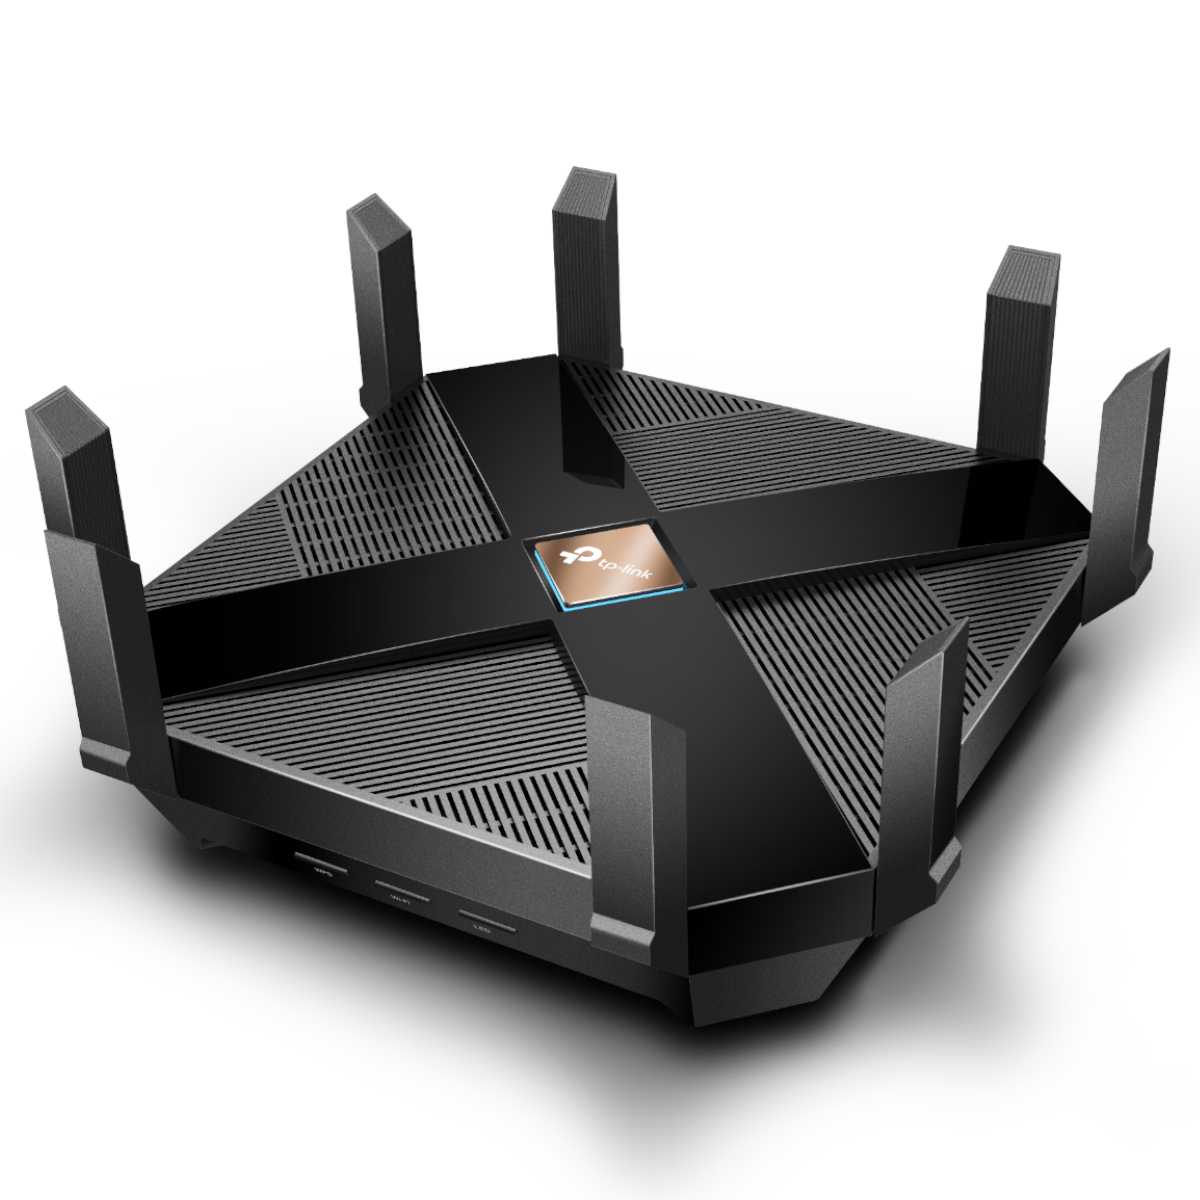 TP-Link - TP-Link Archer AX6000 Wi-Fi 6 MU-MIMO Gaming Router